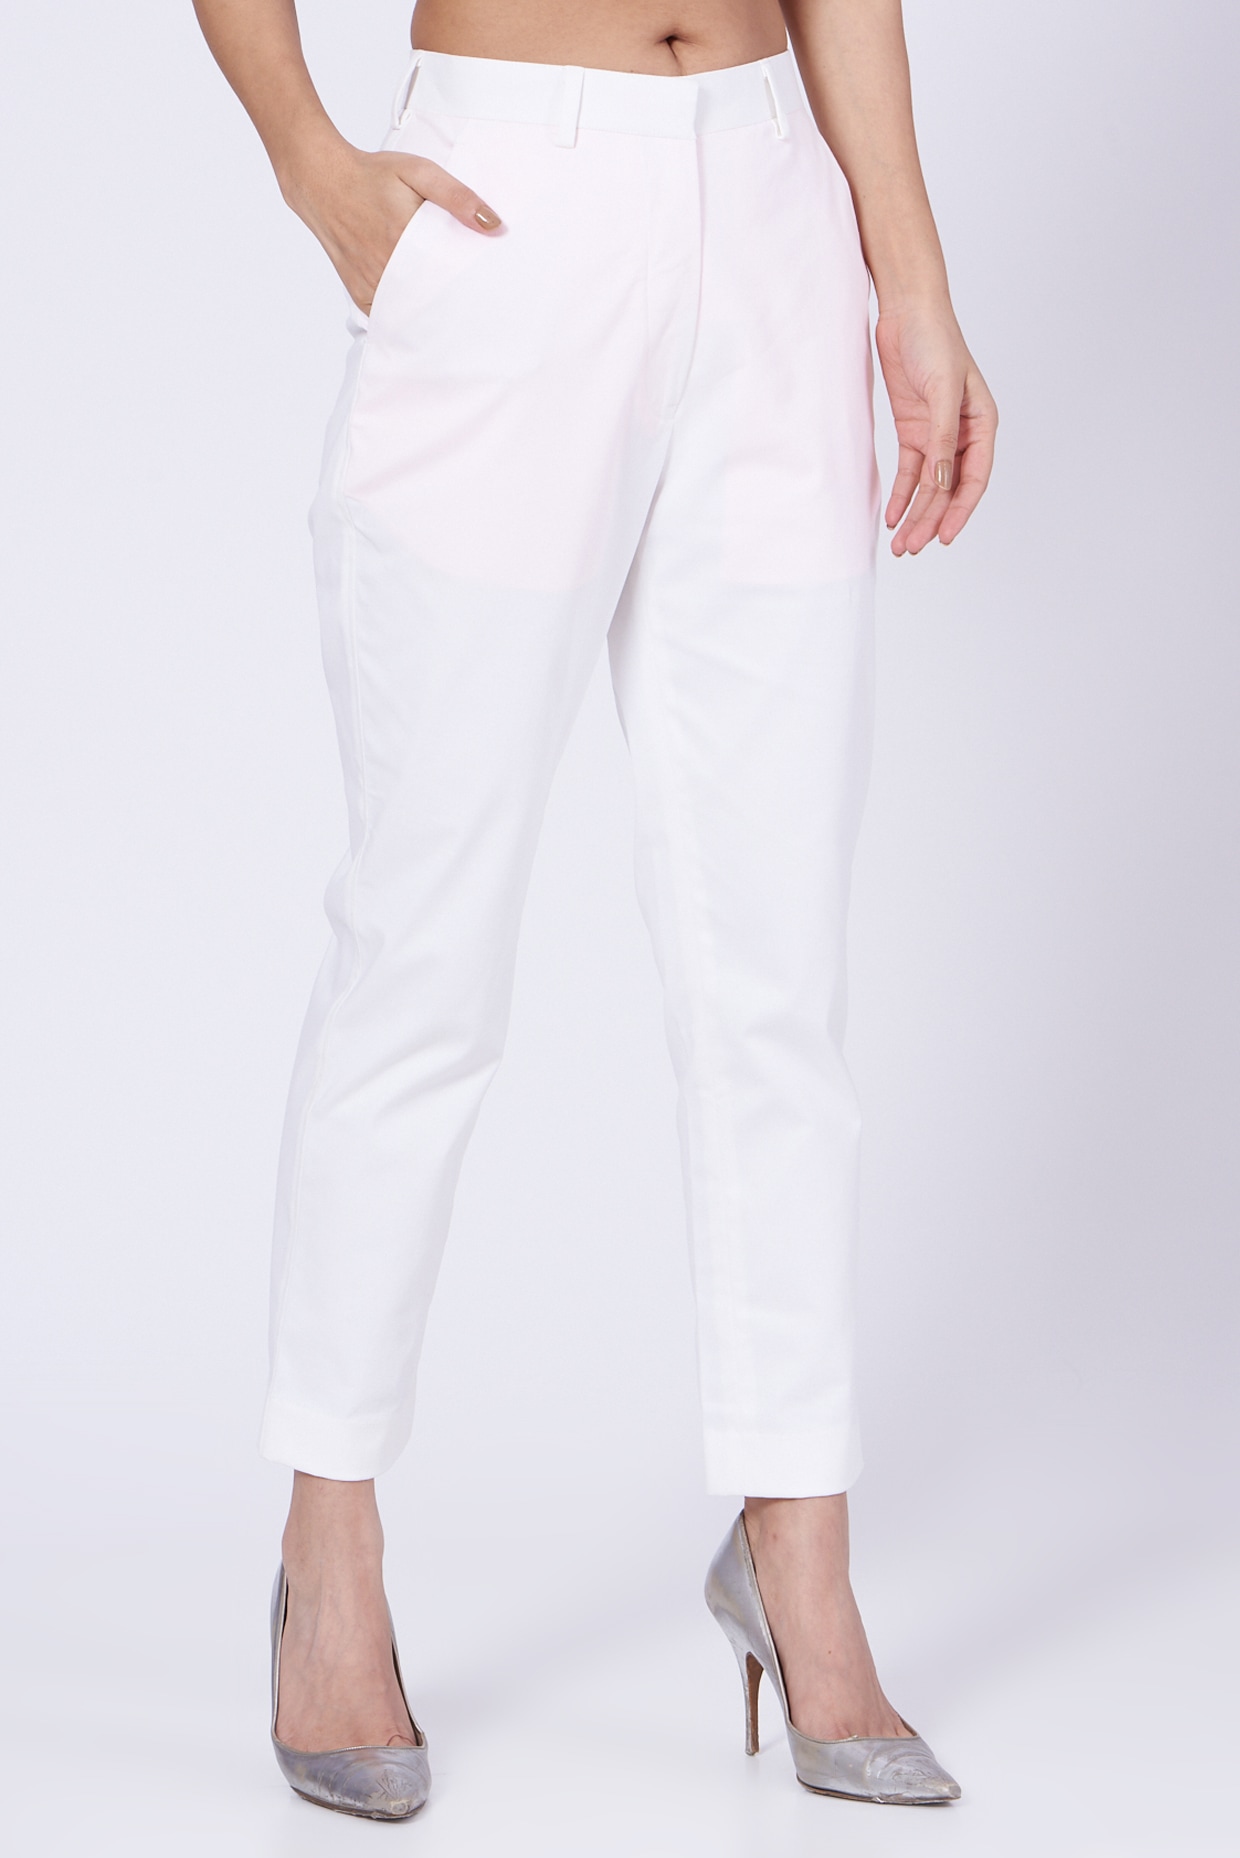 Bonie Cream Ladies Rayon Lycra Pants, Waist Size: L-2XL at Rs 250/piece in  Ahmedabad